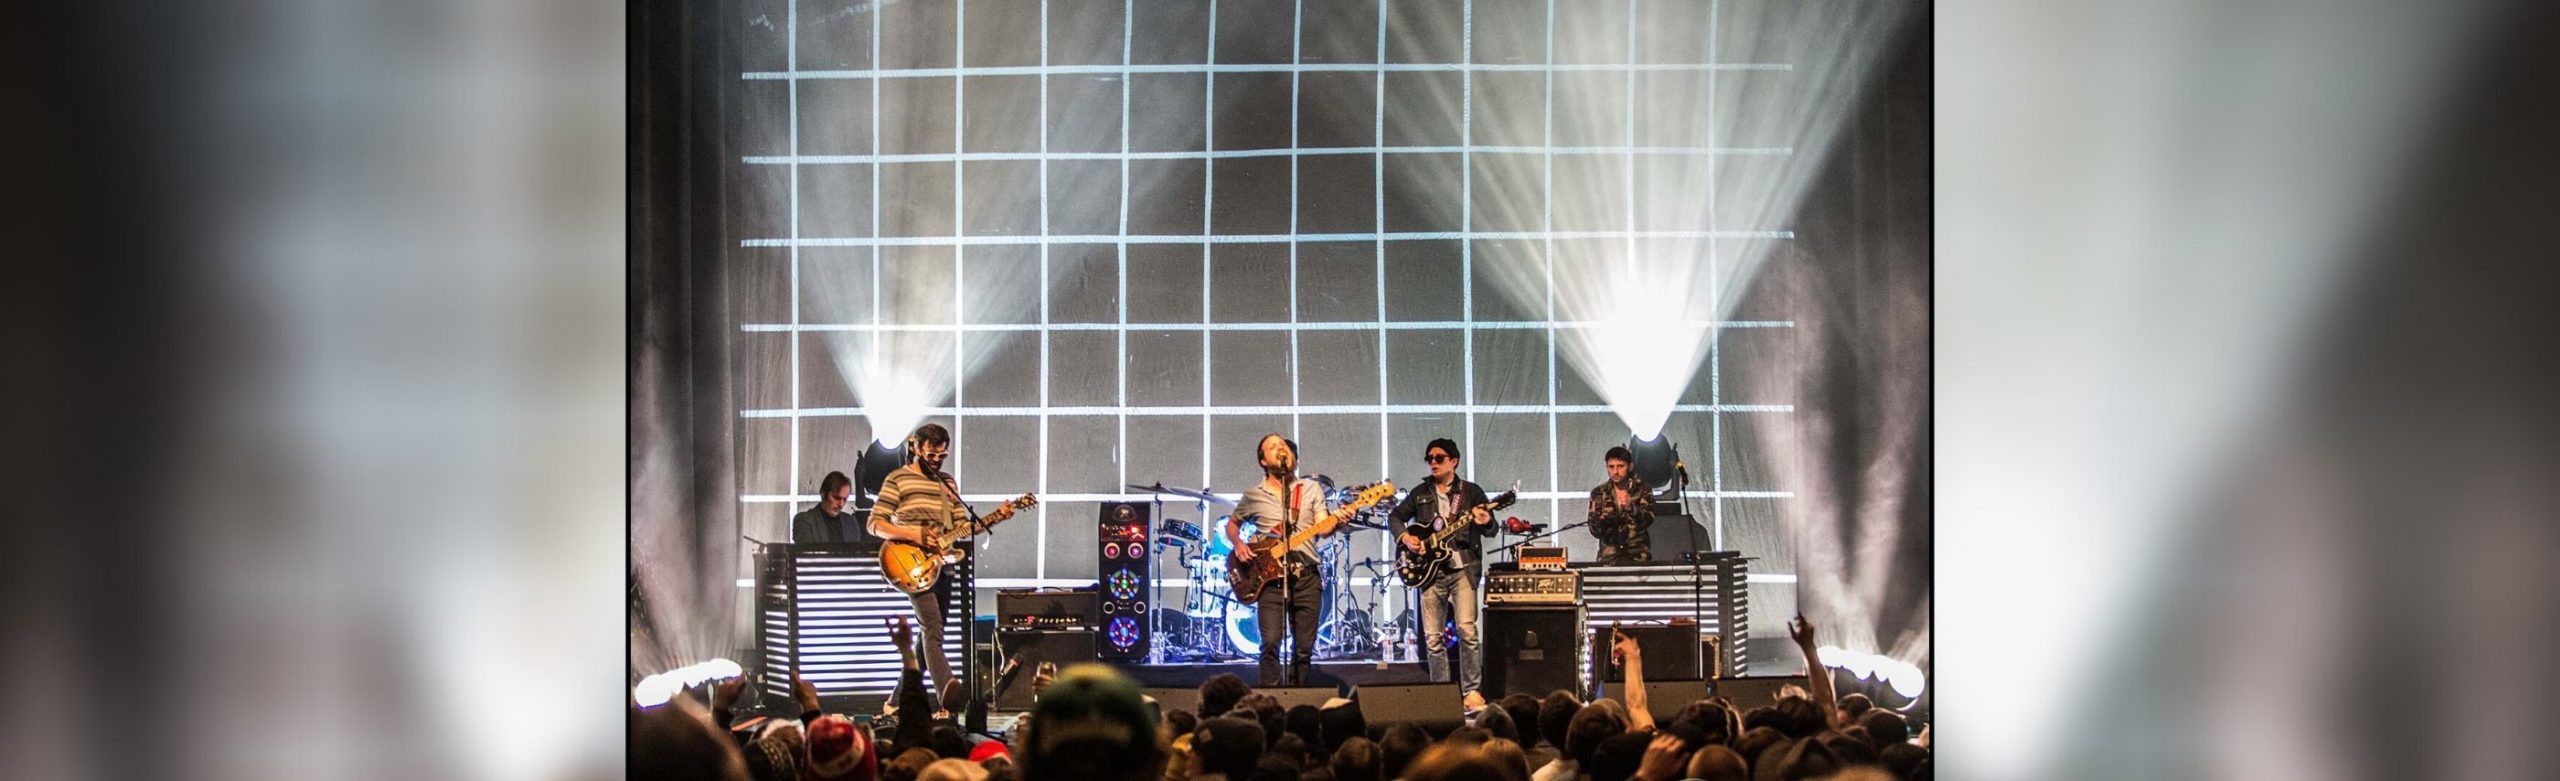 Event Info: Dr. Dog at the Wilma 2020 Image